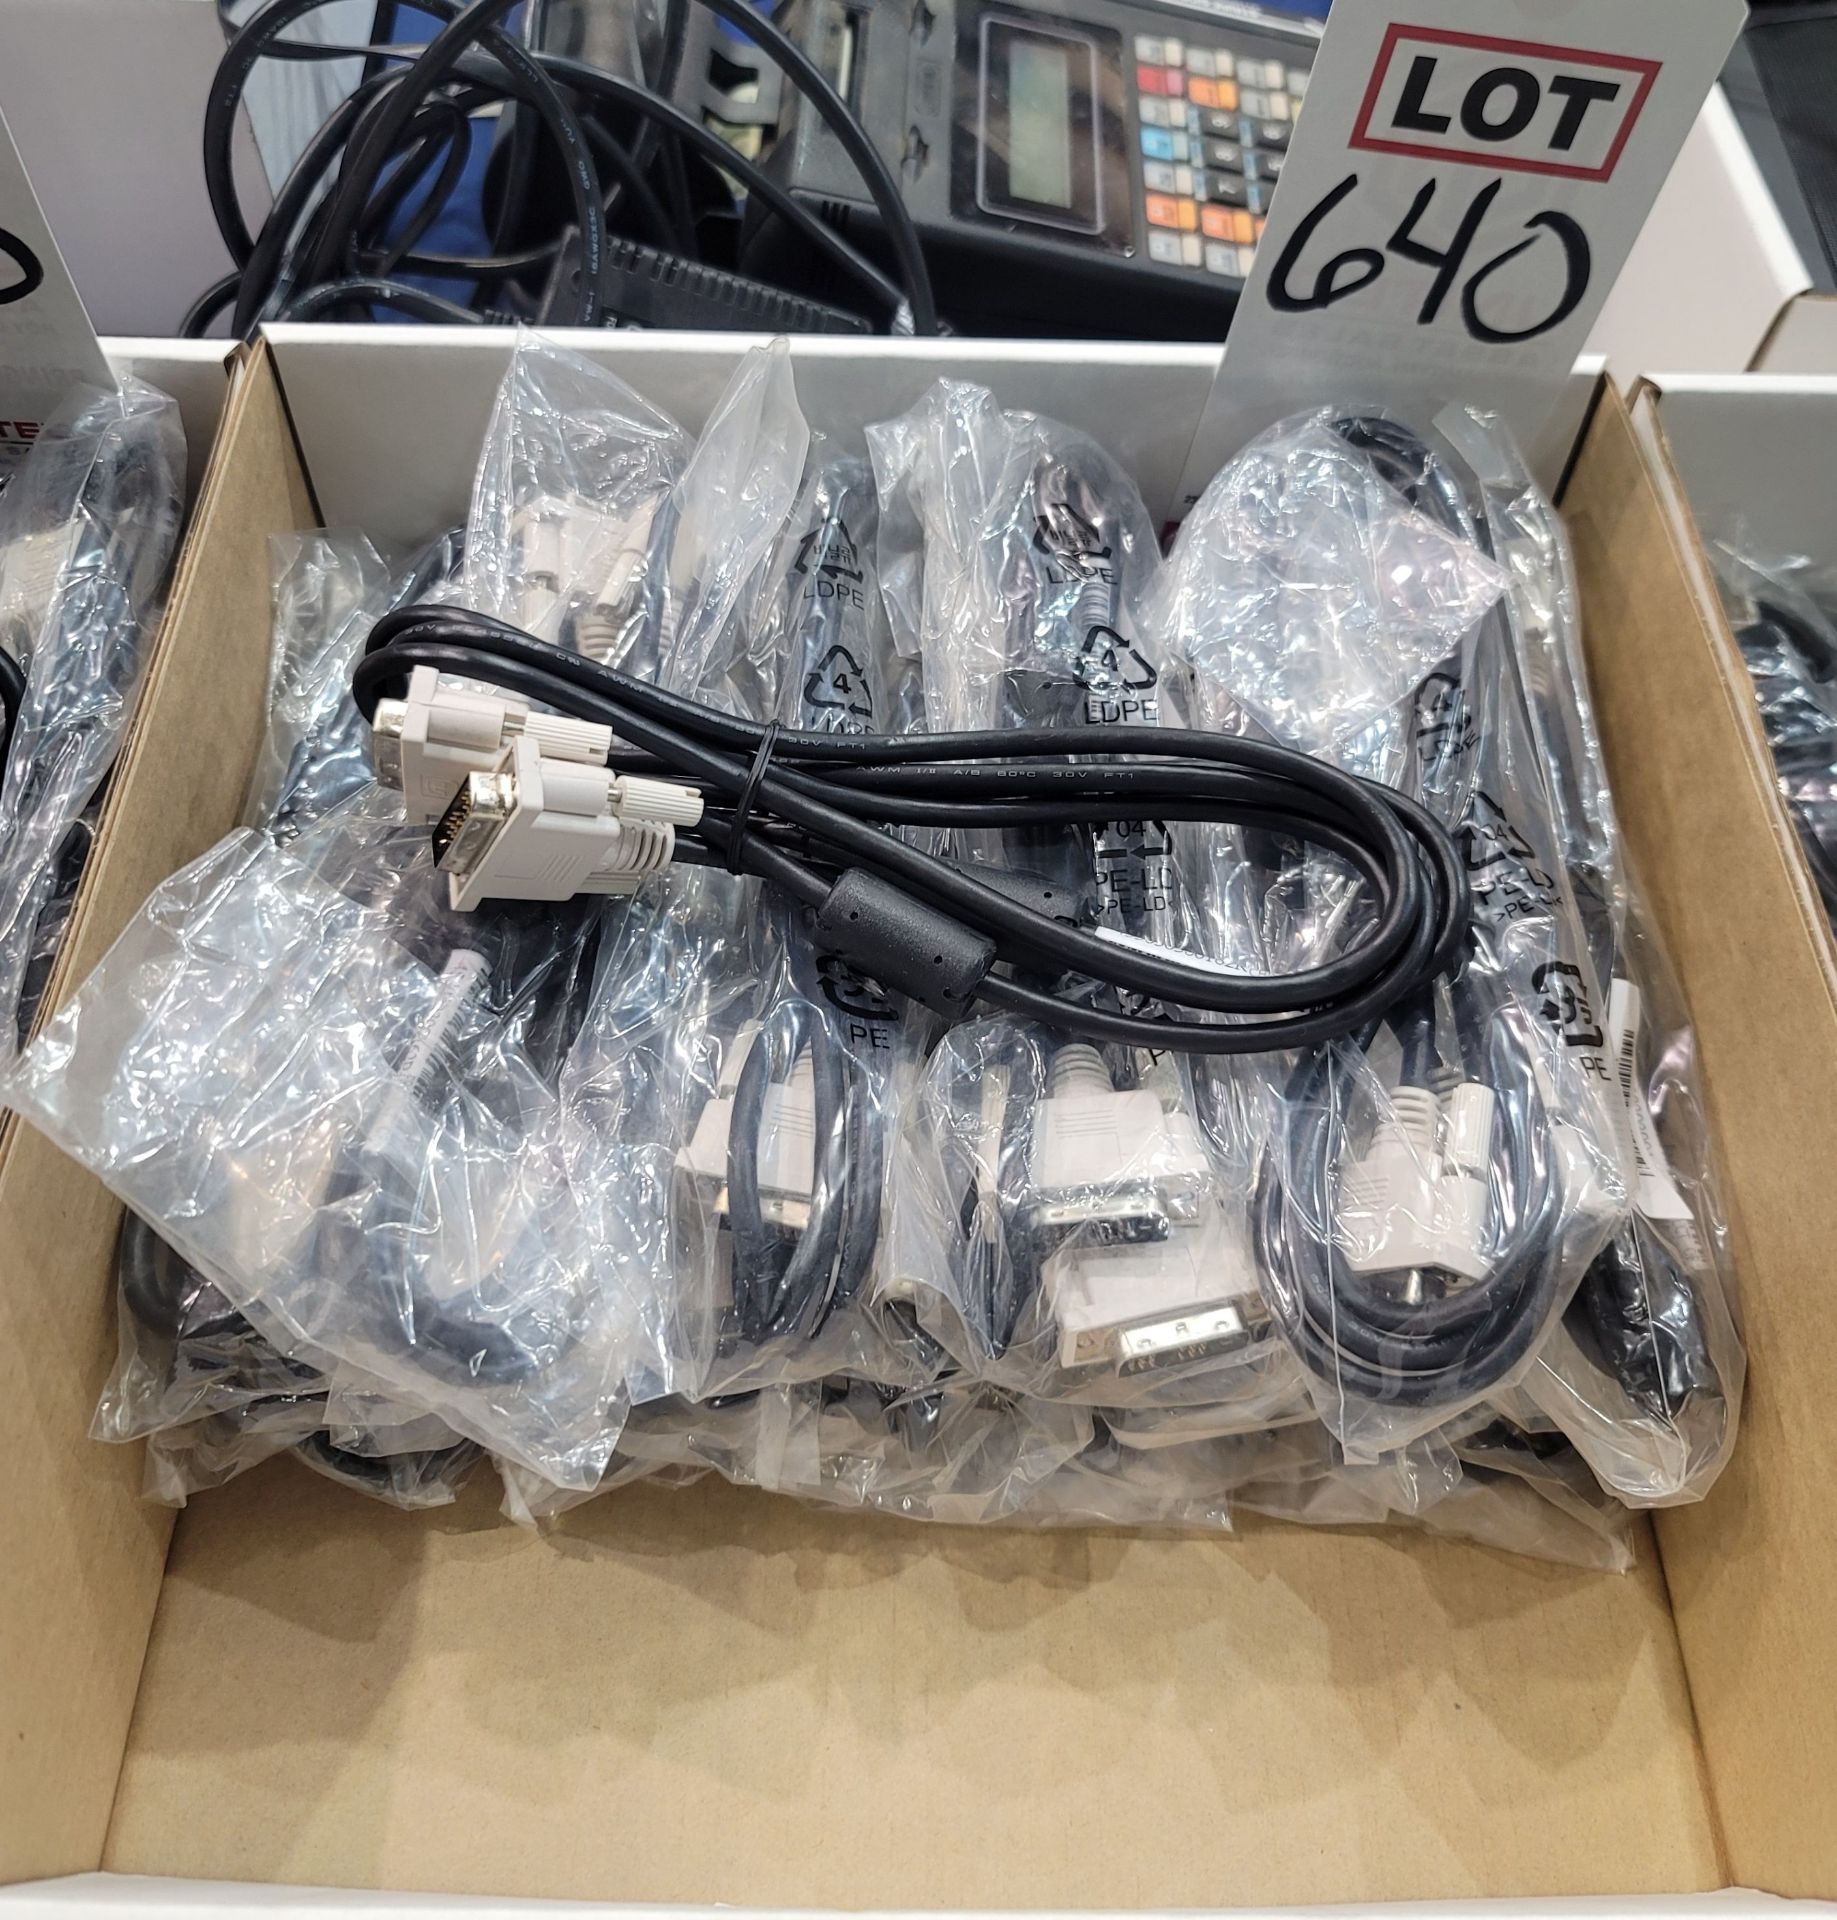 LOT - MONITOR CABLES OR PRINTER CABLES, (BUILDING 3)